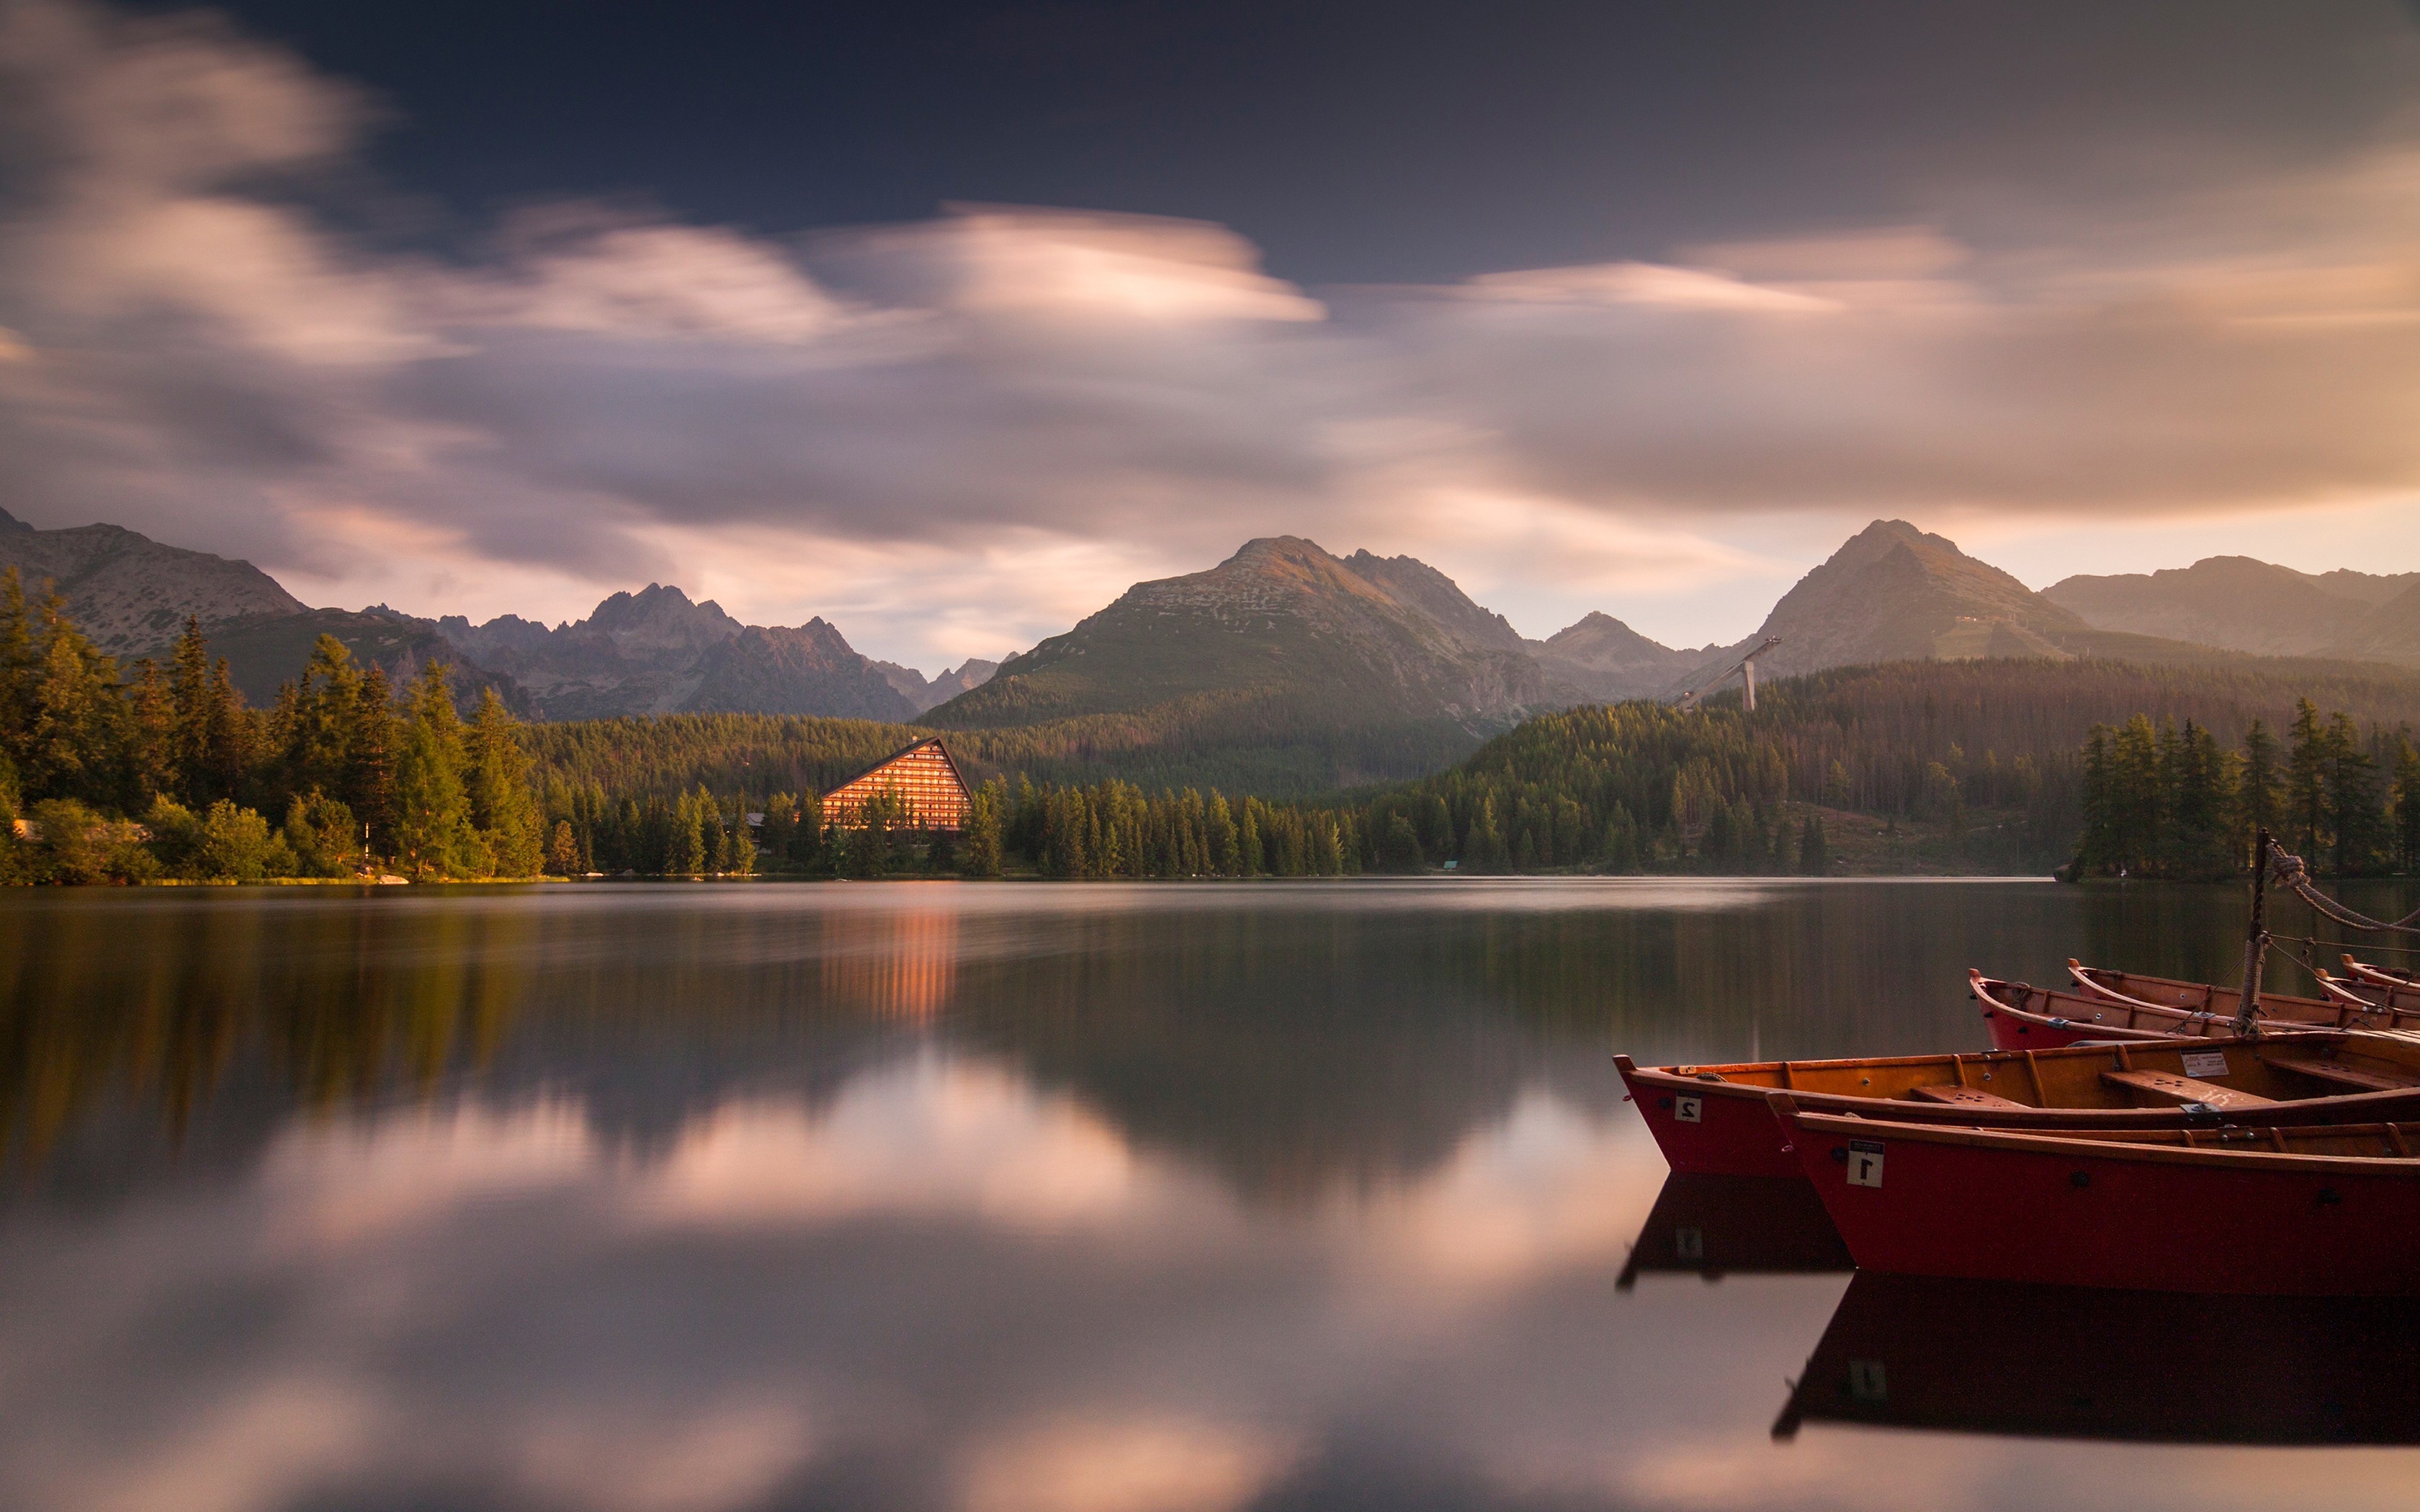 nature, Landscape, Mountain, Sunset, Lake, Forest, Boat, Calm, Clouds, Slovakia, Hotels Wallpaper